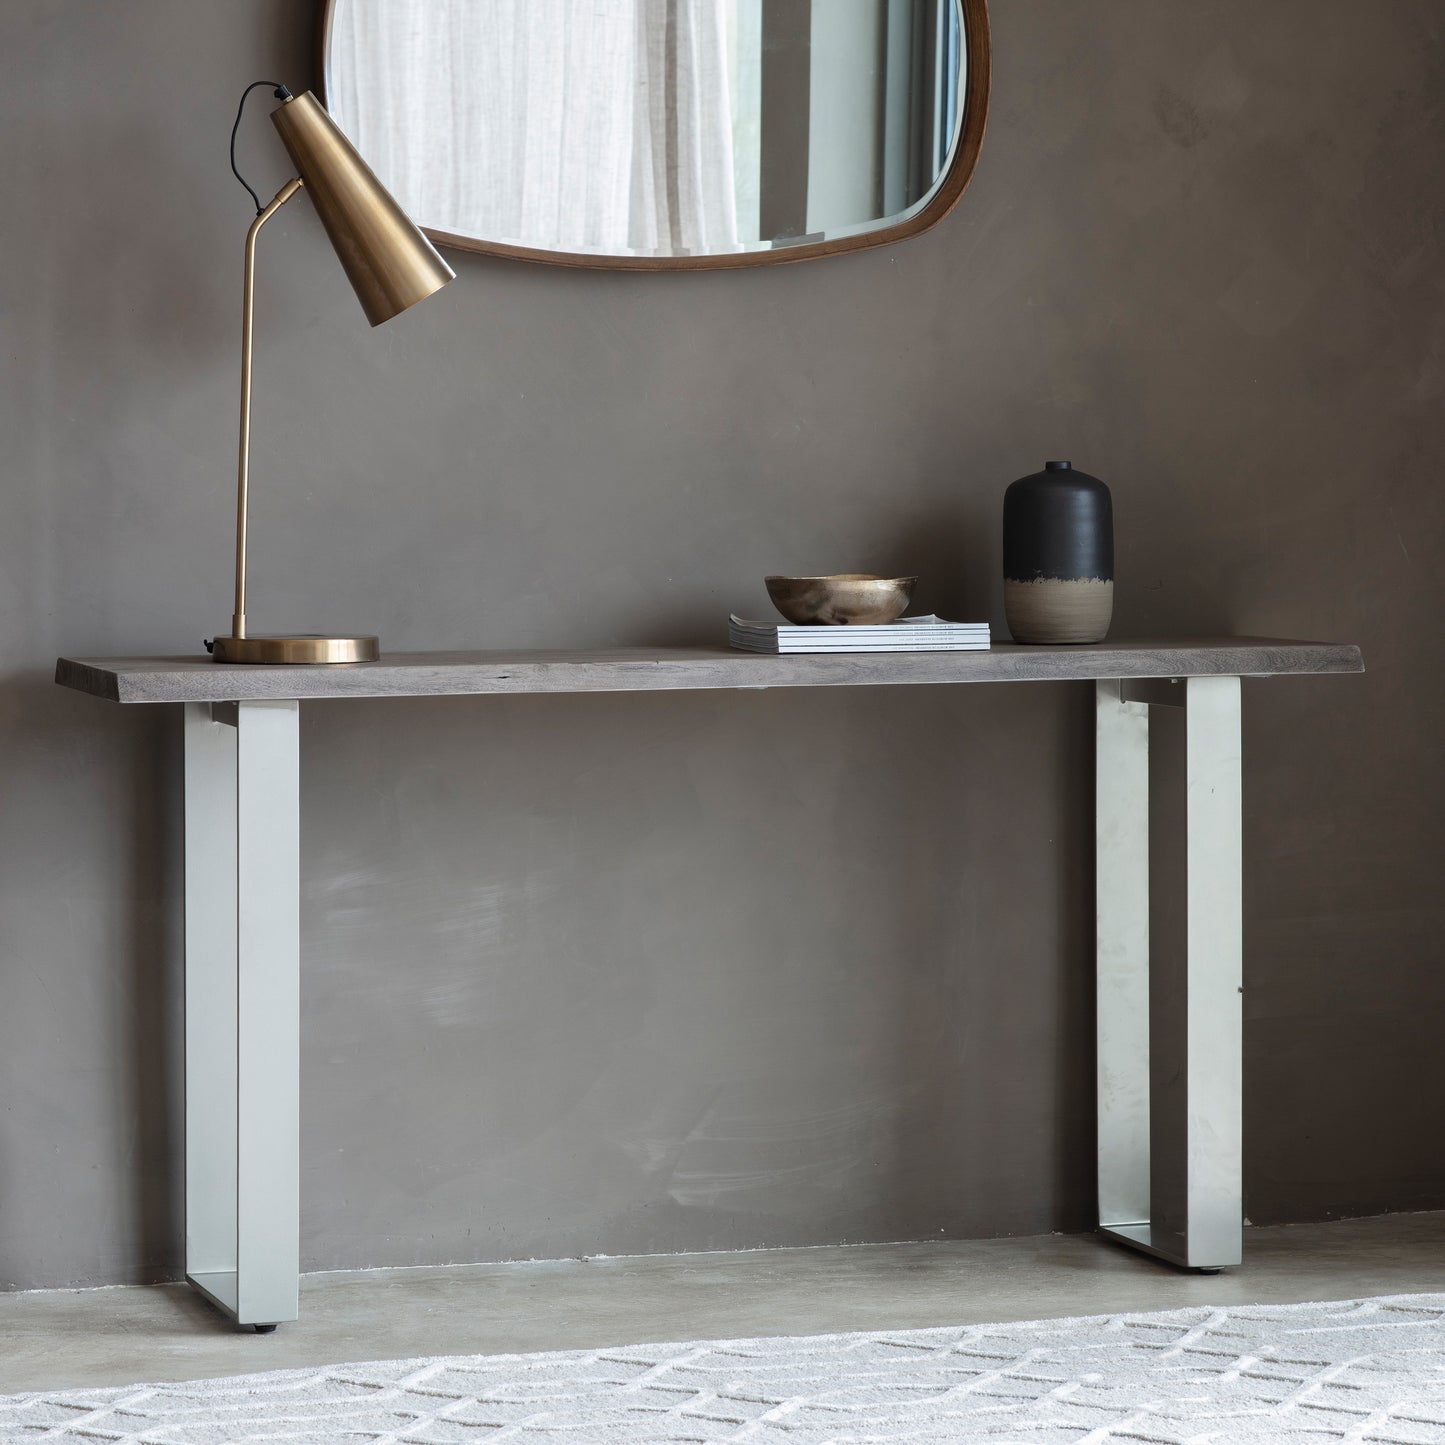 A Southpool Console Table 1600x360x800mm by Kikiathome.co.uk, offering home furniture and interior decor with a mirror and a lamp.